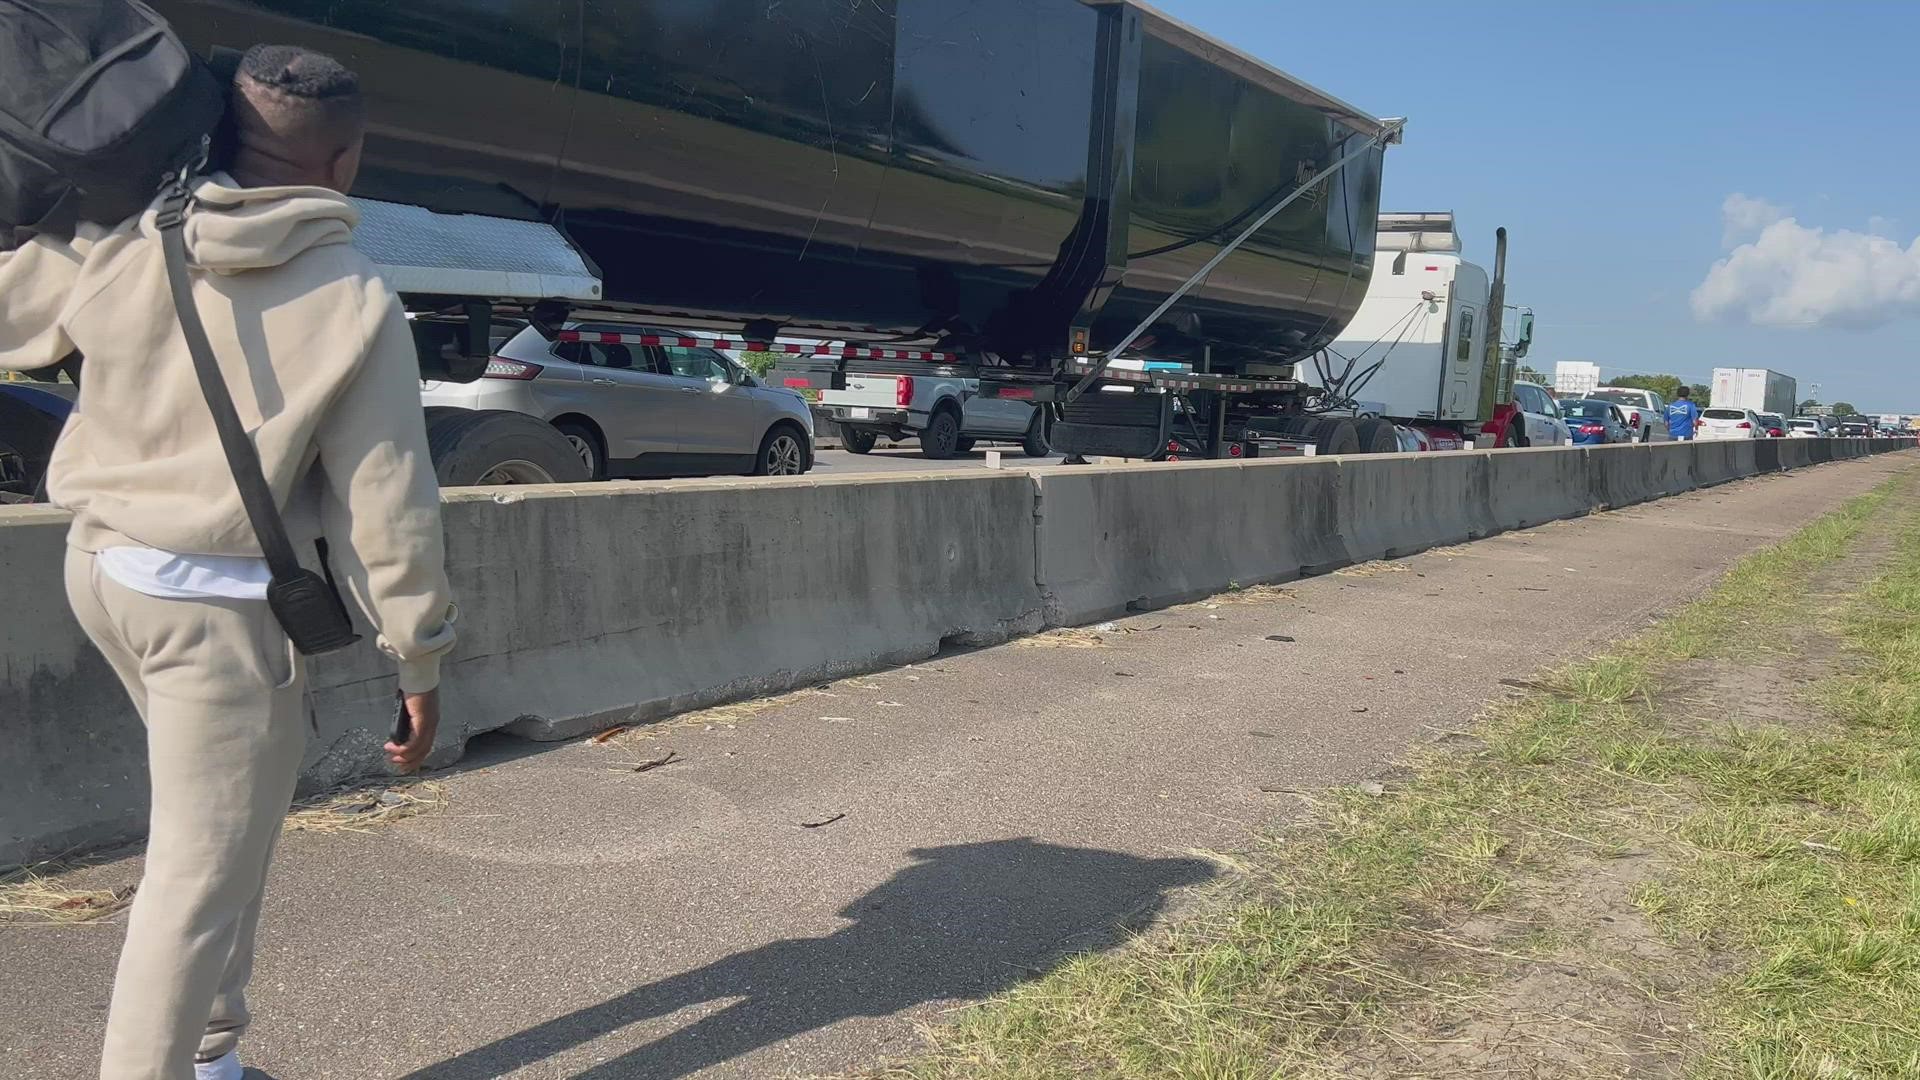 With traffic at a standstill on I-10 west before the airport exit, some travelers decided to walk alongside the interstate to hopefully make their scheduled flights.